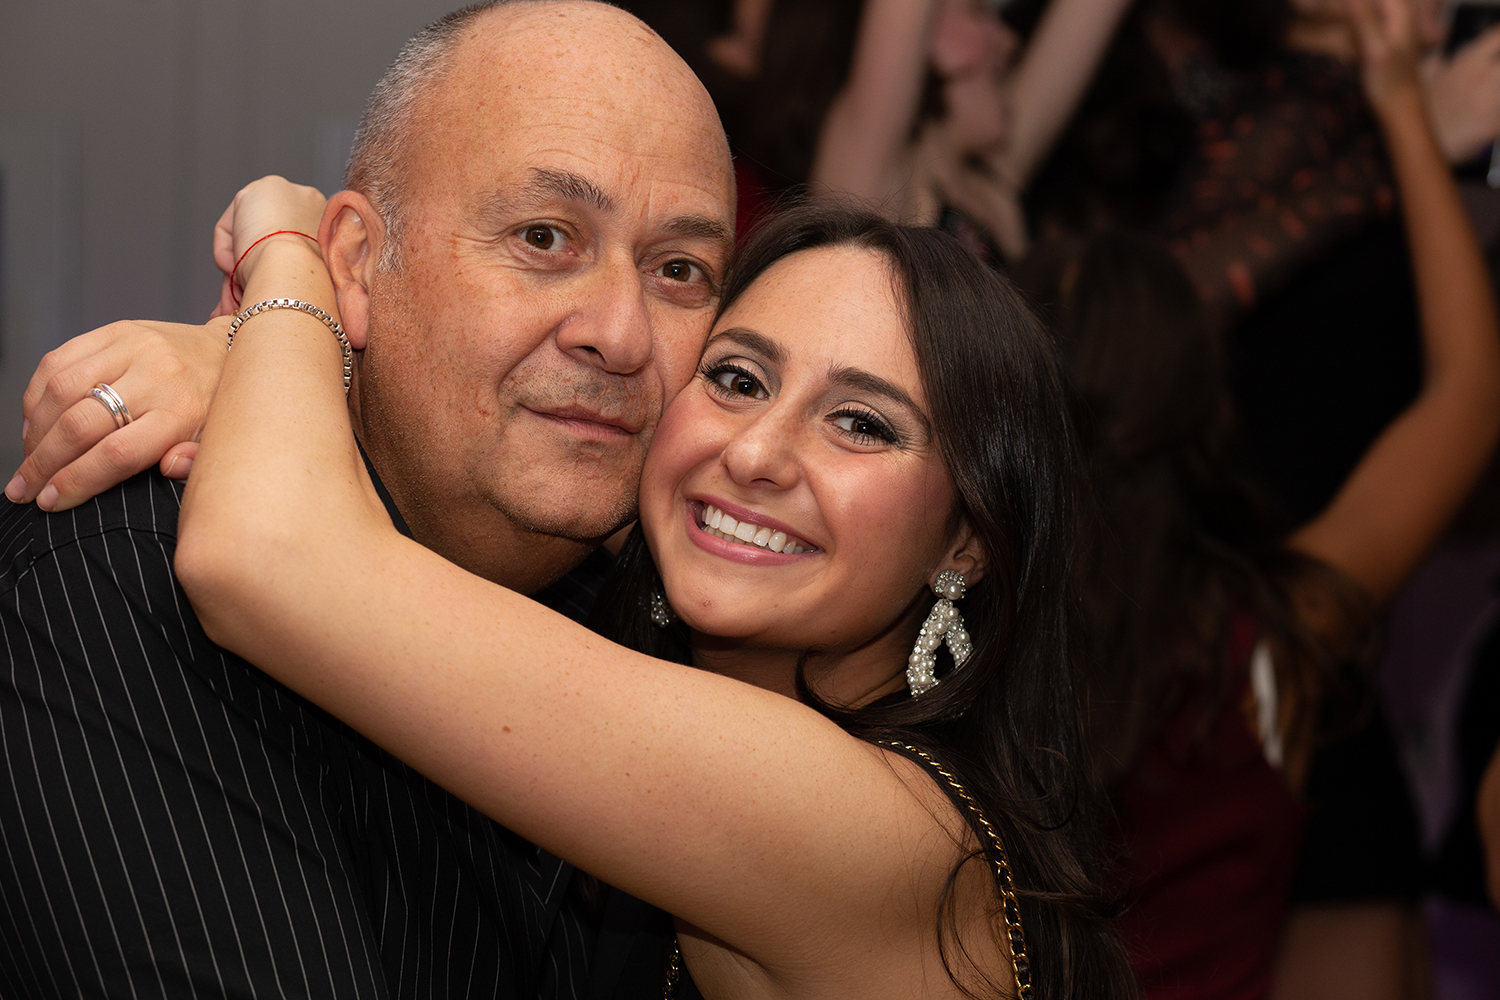 Woman hugging father at party